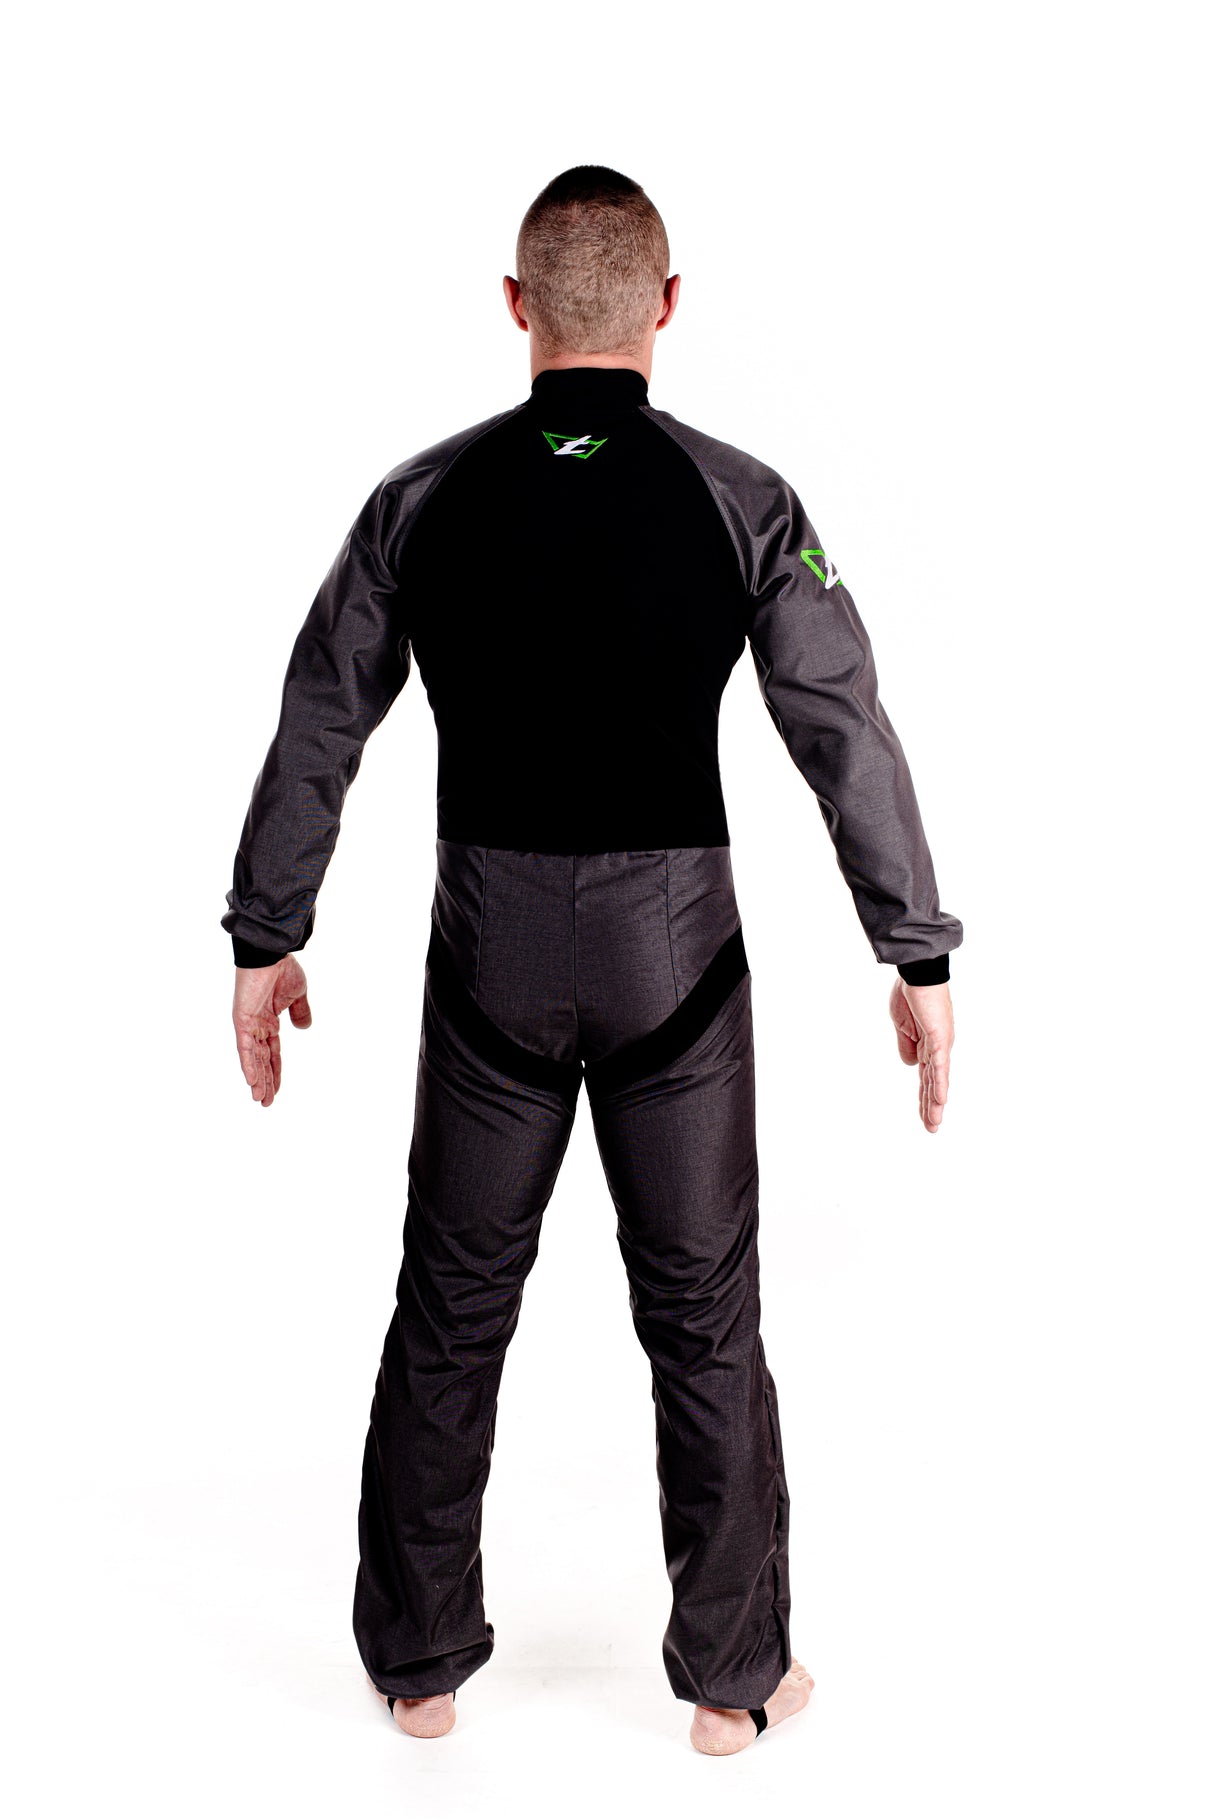 Tonfly Heavy Duty Skydiving Suit - SkydiveShop.com